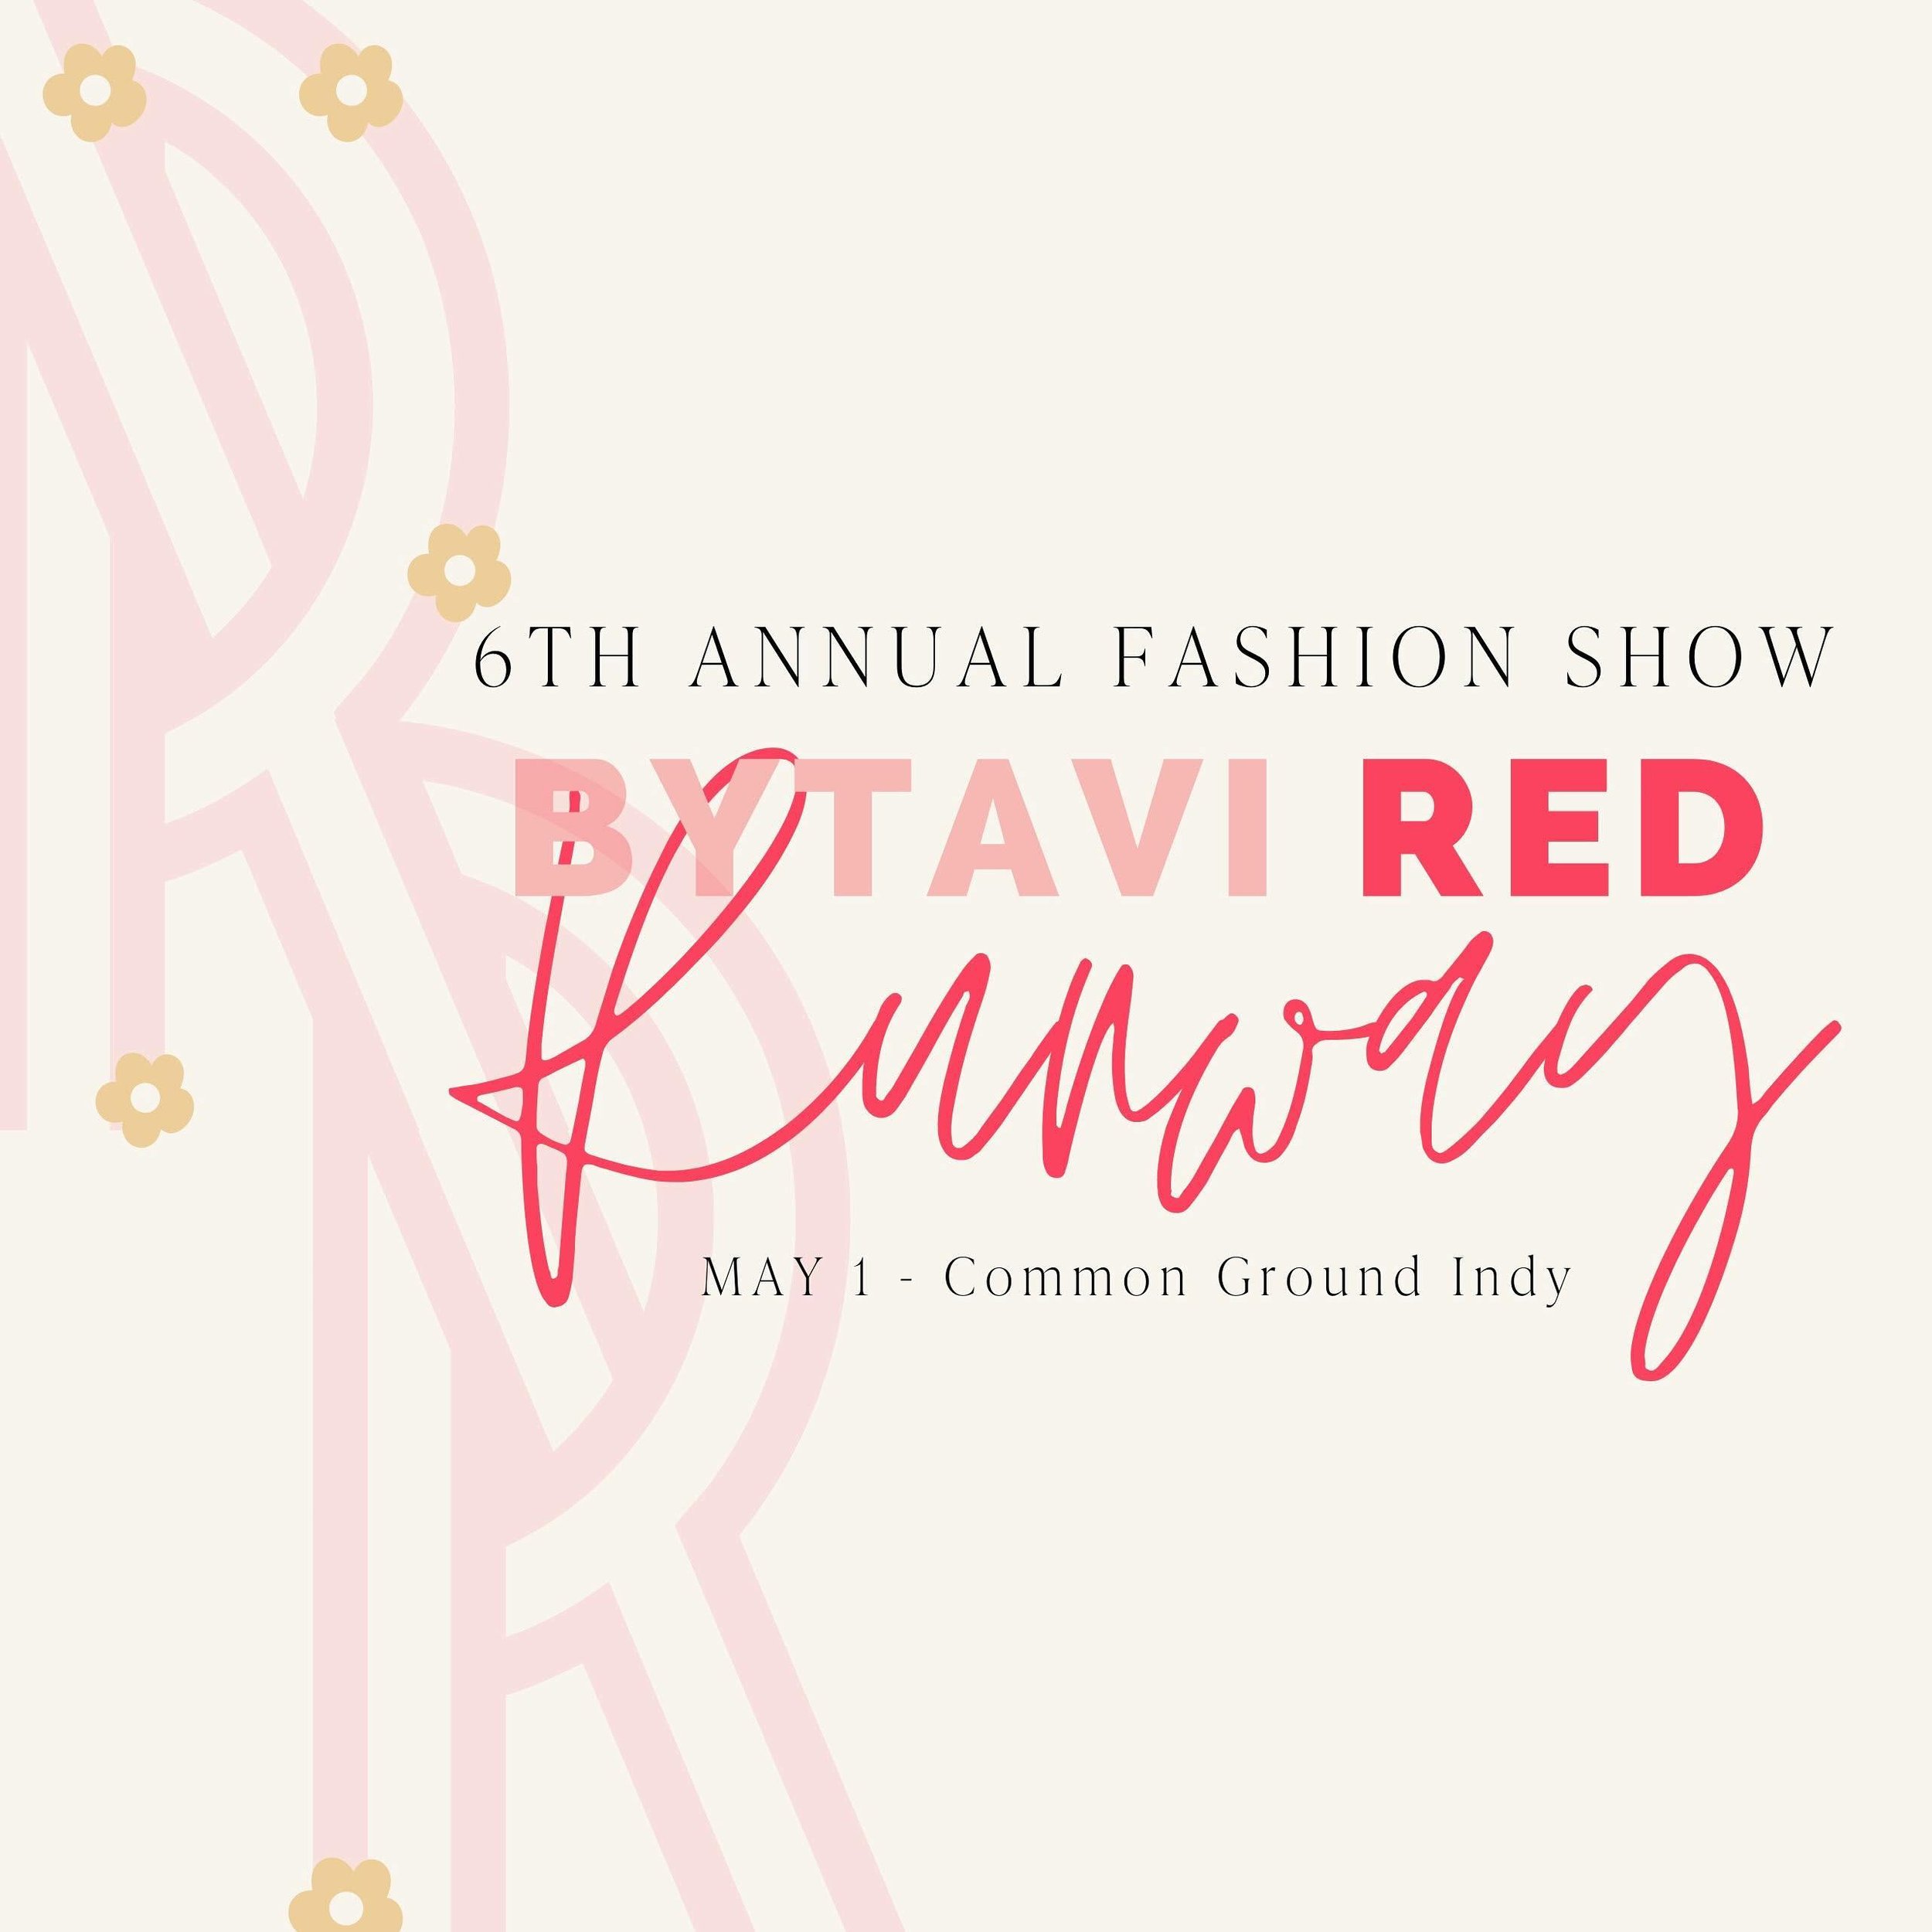 Our team is so excited to support @bytavi this week as they celebrate their sixth annual Red Runway event! ❤️

Tickets are still available online or at the door! (The code RRFLOURISH gets you $5 off!) We hope to see you there. 

✨ Wednesday May 1 
✨ 